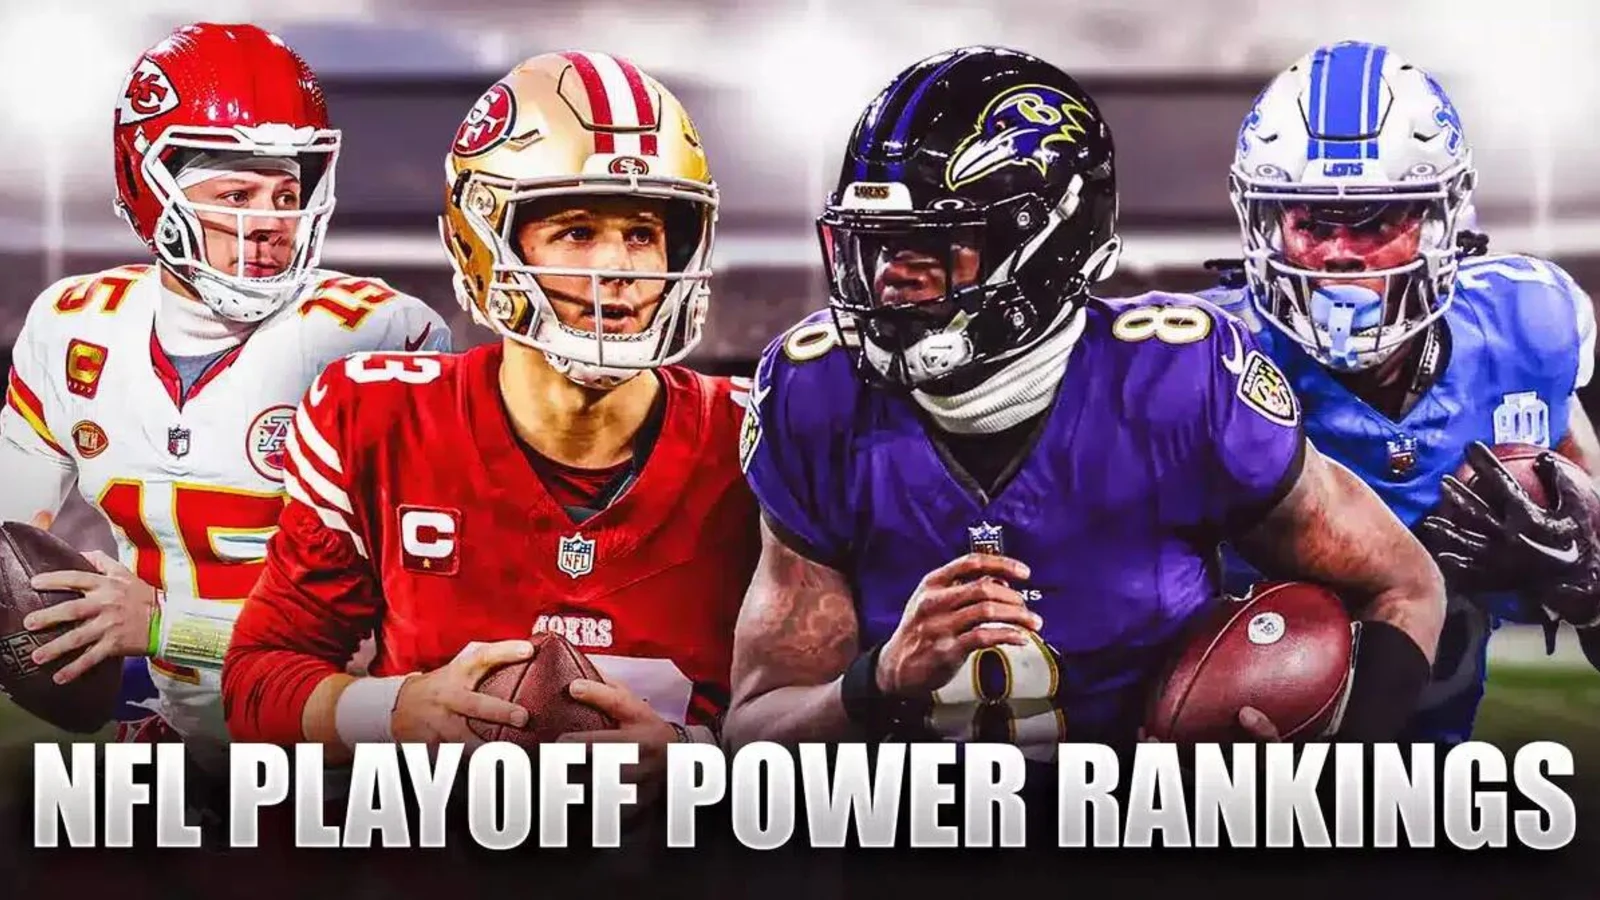 NFL Playoff Power Rankings: Ravens coast into Championship Round as 49ers sneak by Packers